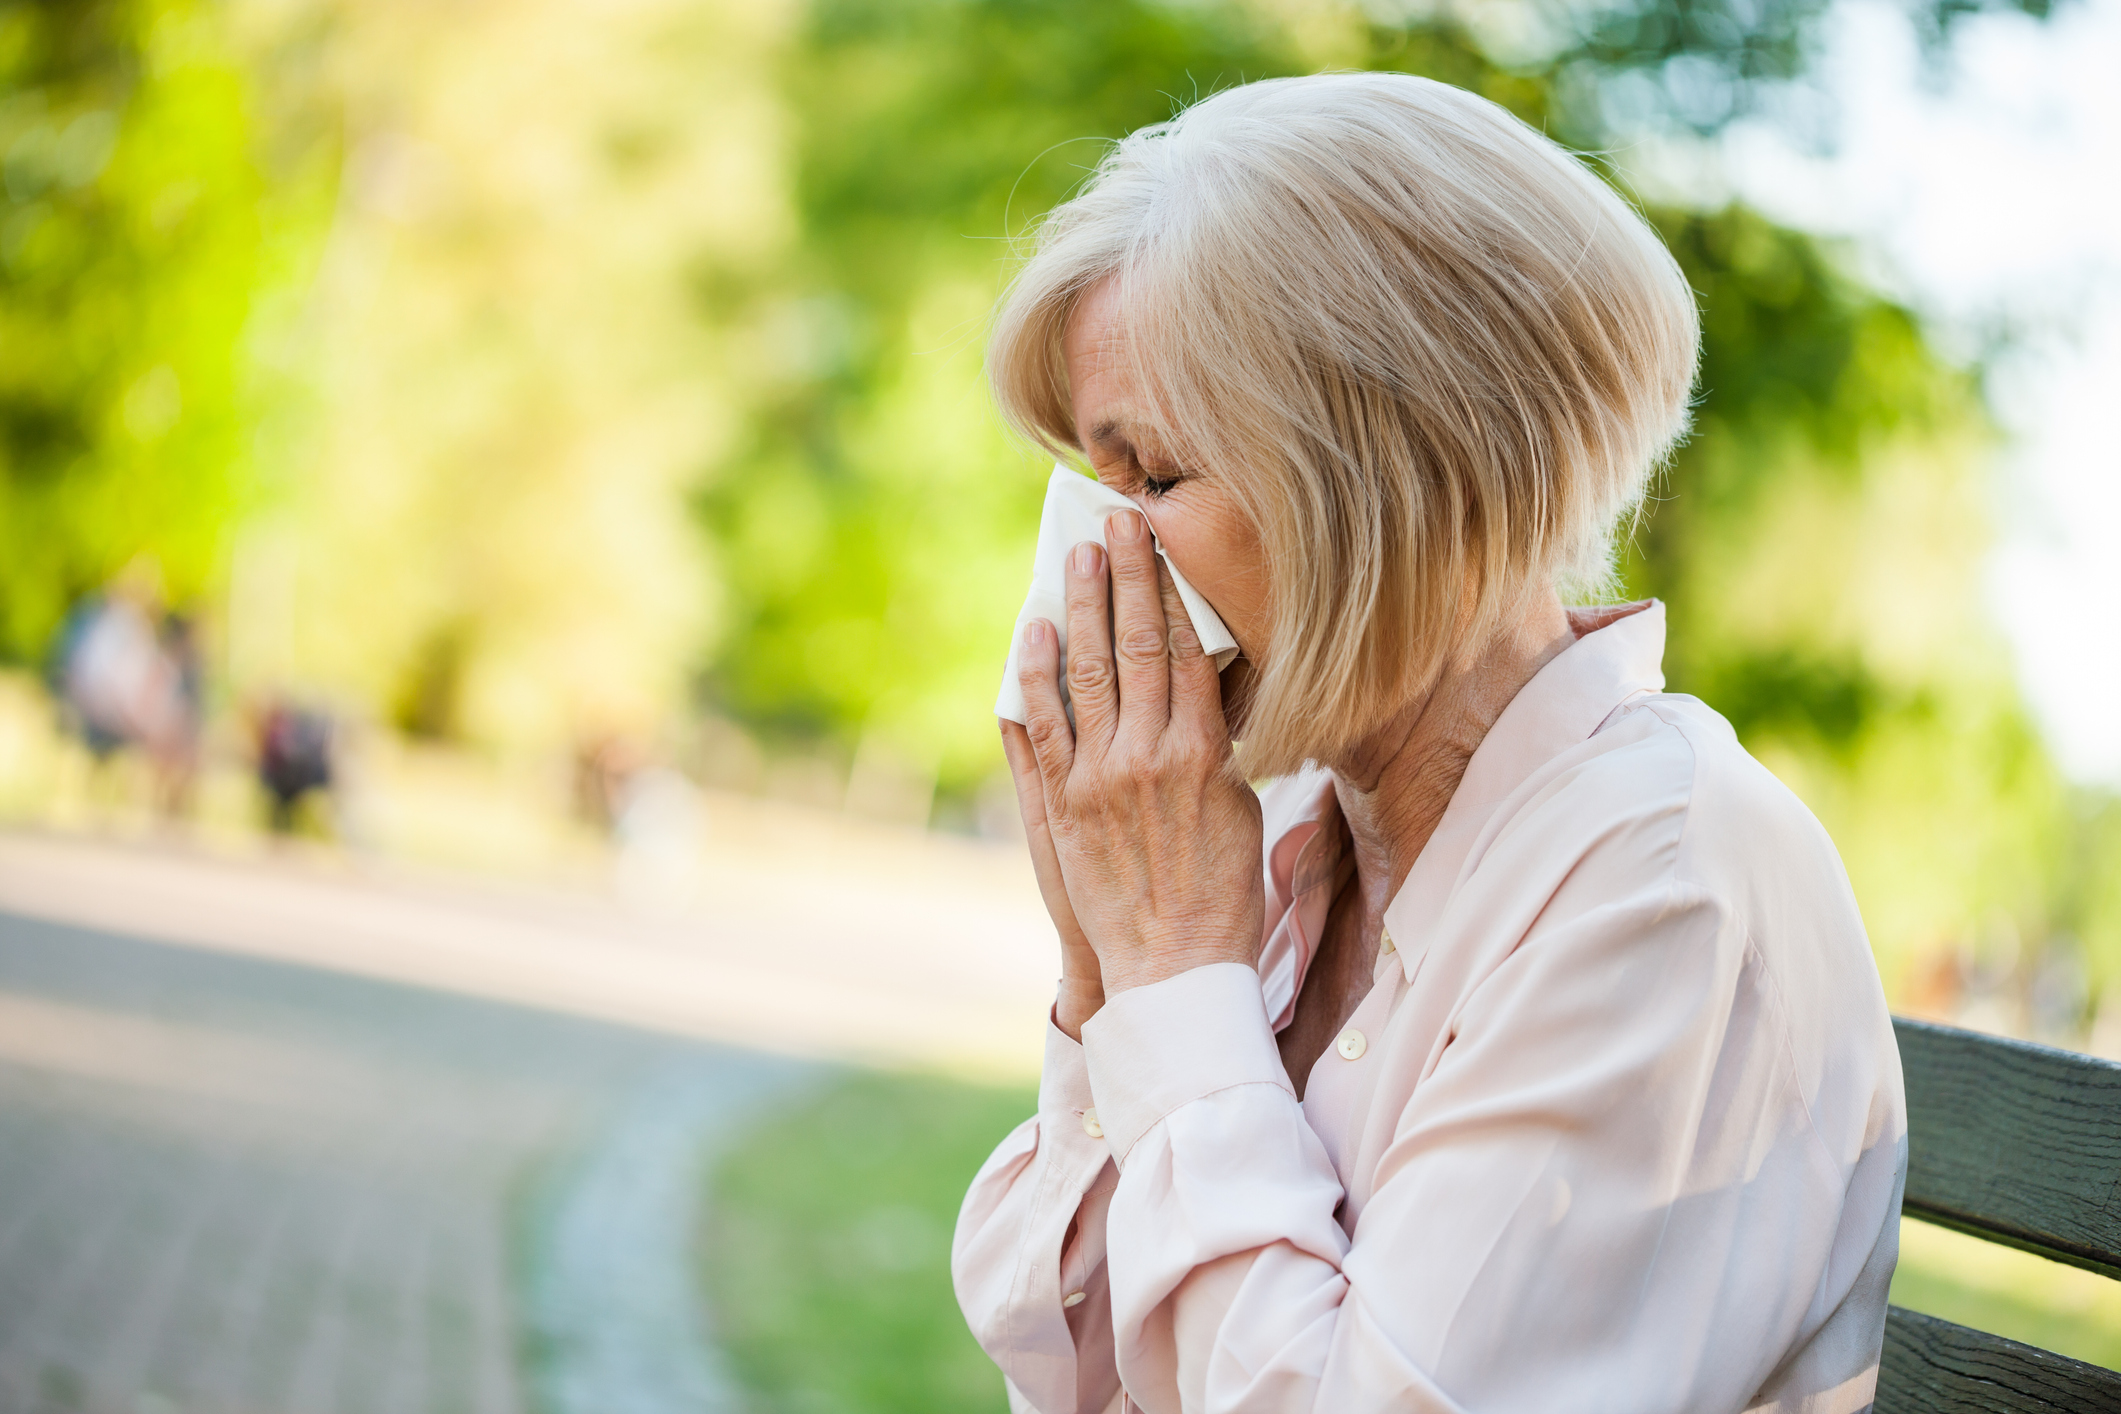 An image of a woman with allergies blowing her nose in a park. 